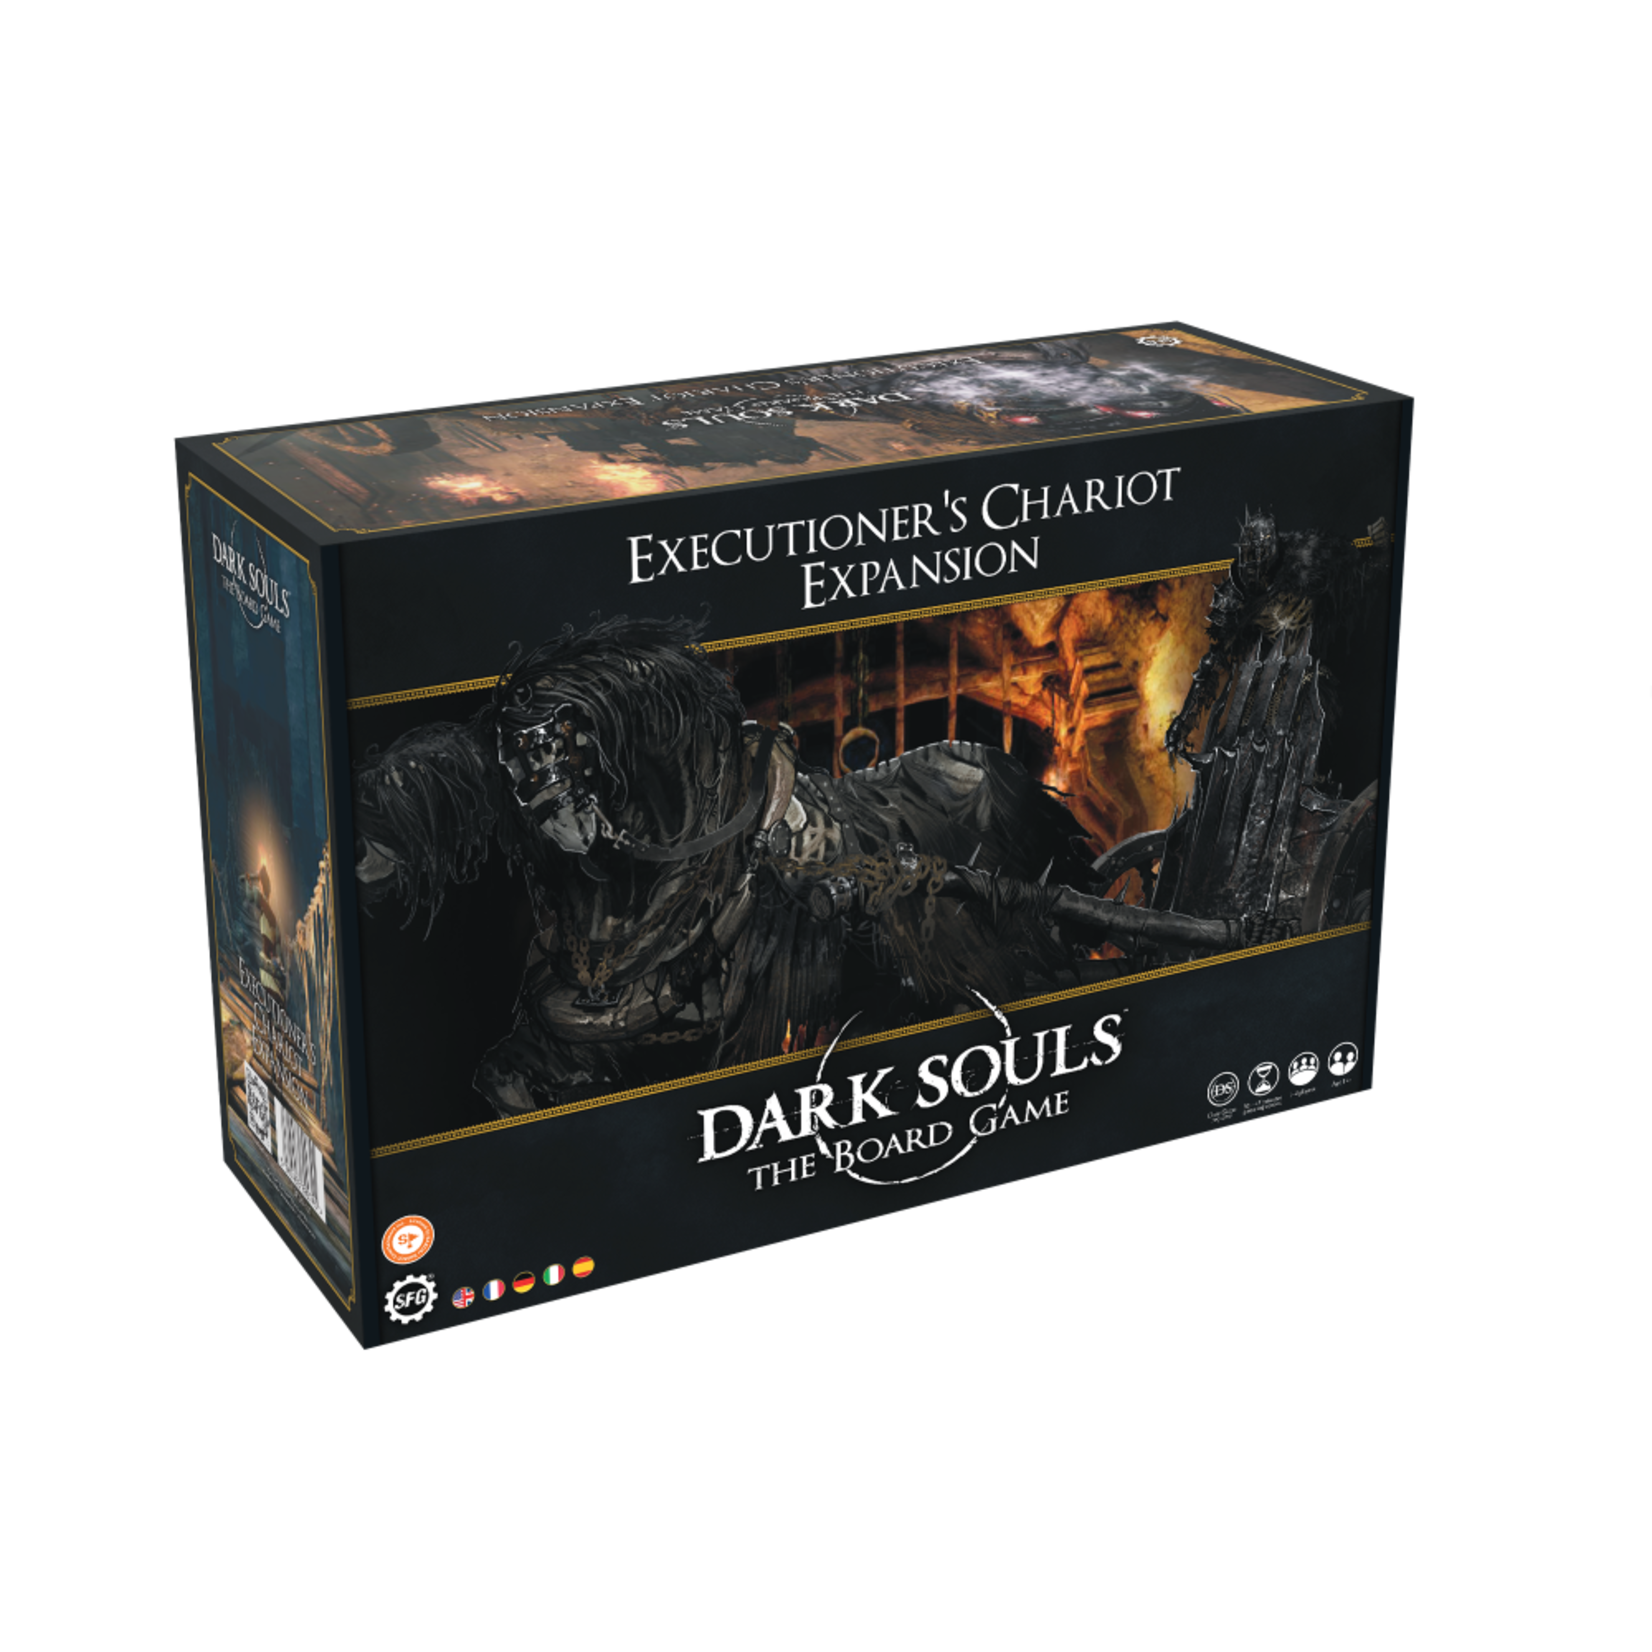 Steamforged Games Dark Souls: Executioner's Chariot Expansion